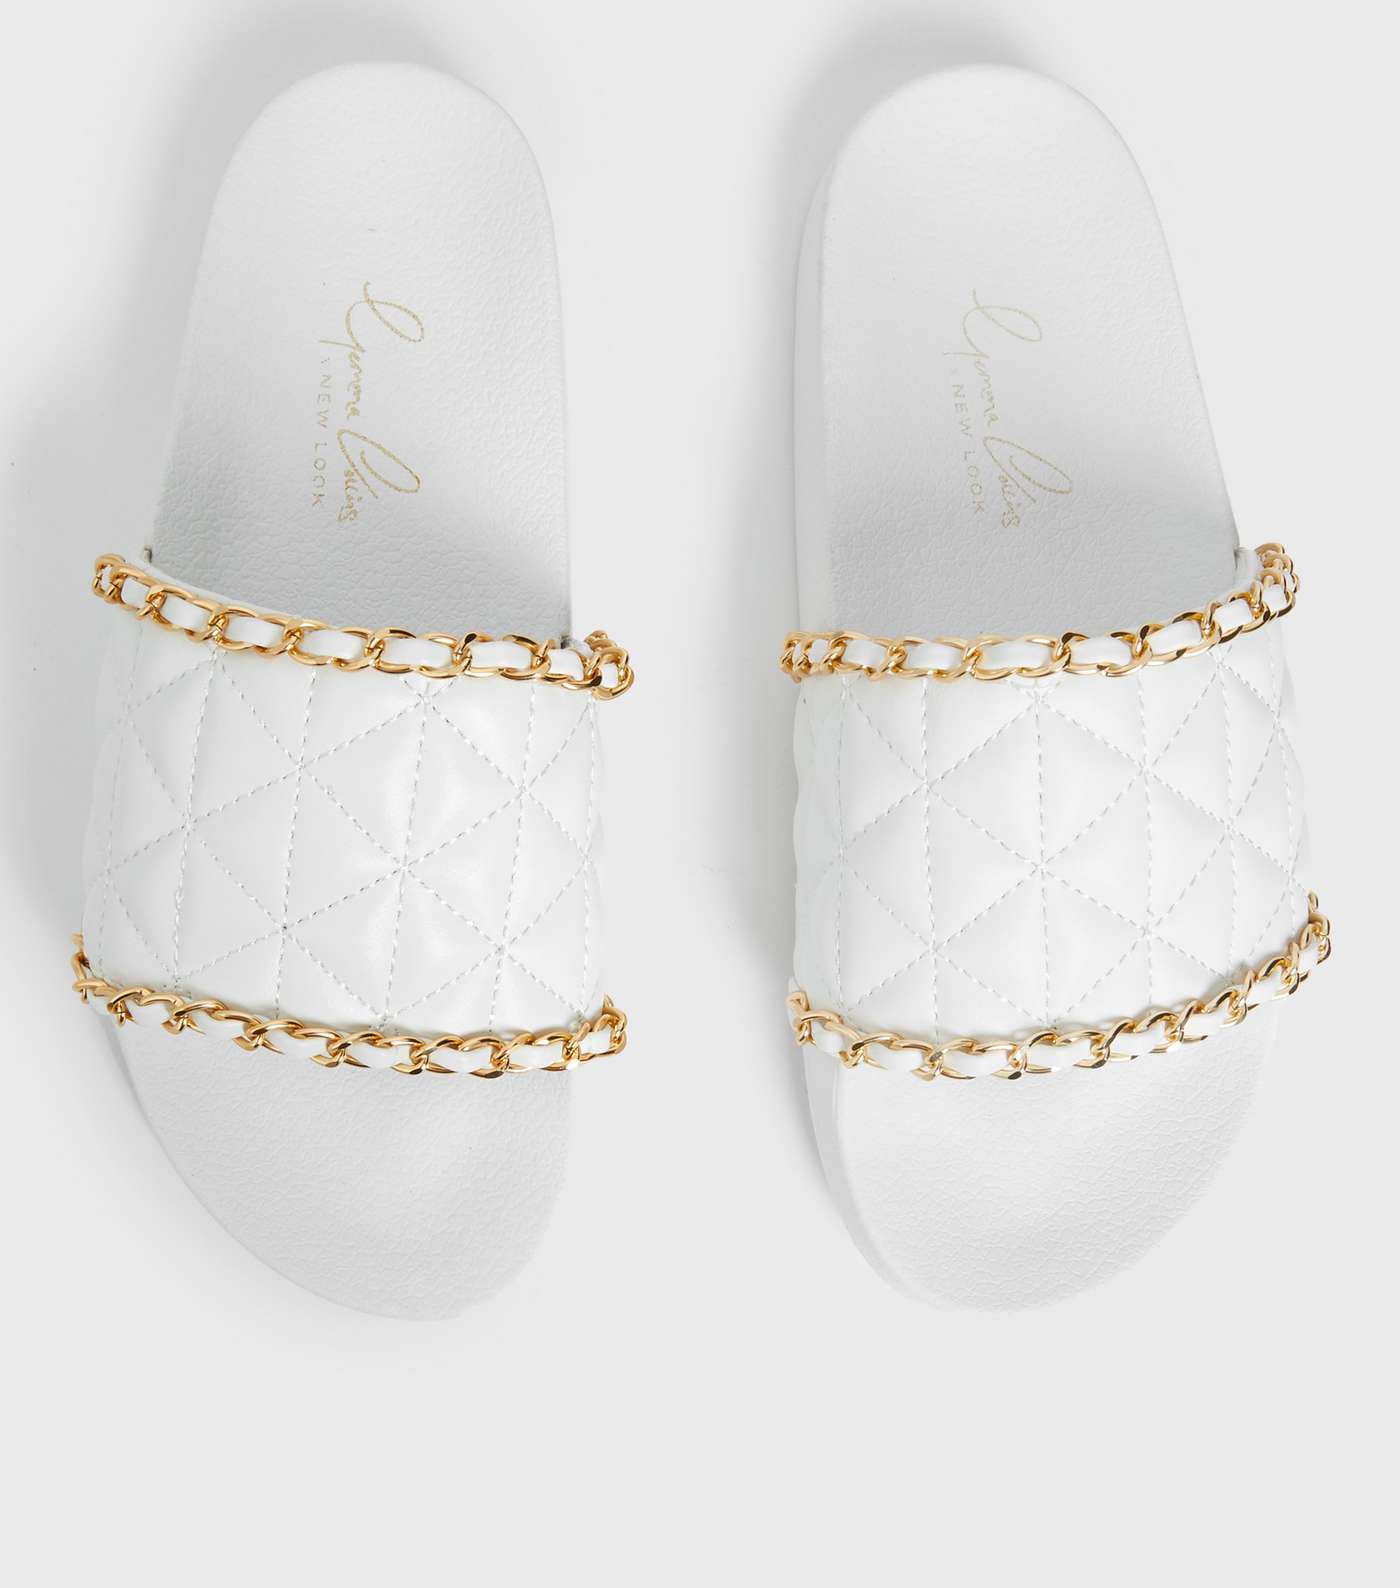 Bon Voyage White Leather-Look Chain Sliders Image 2